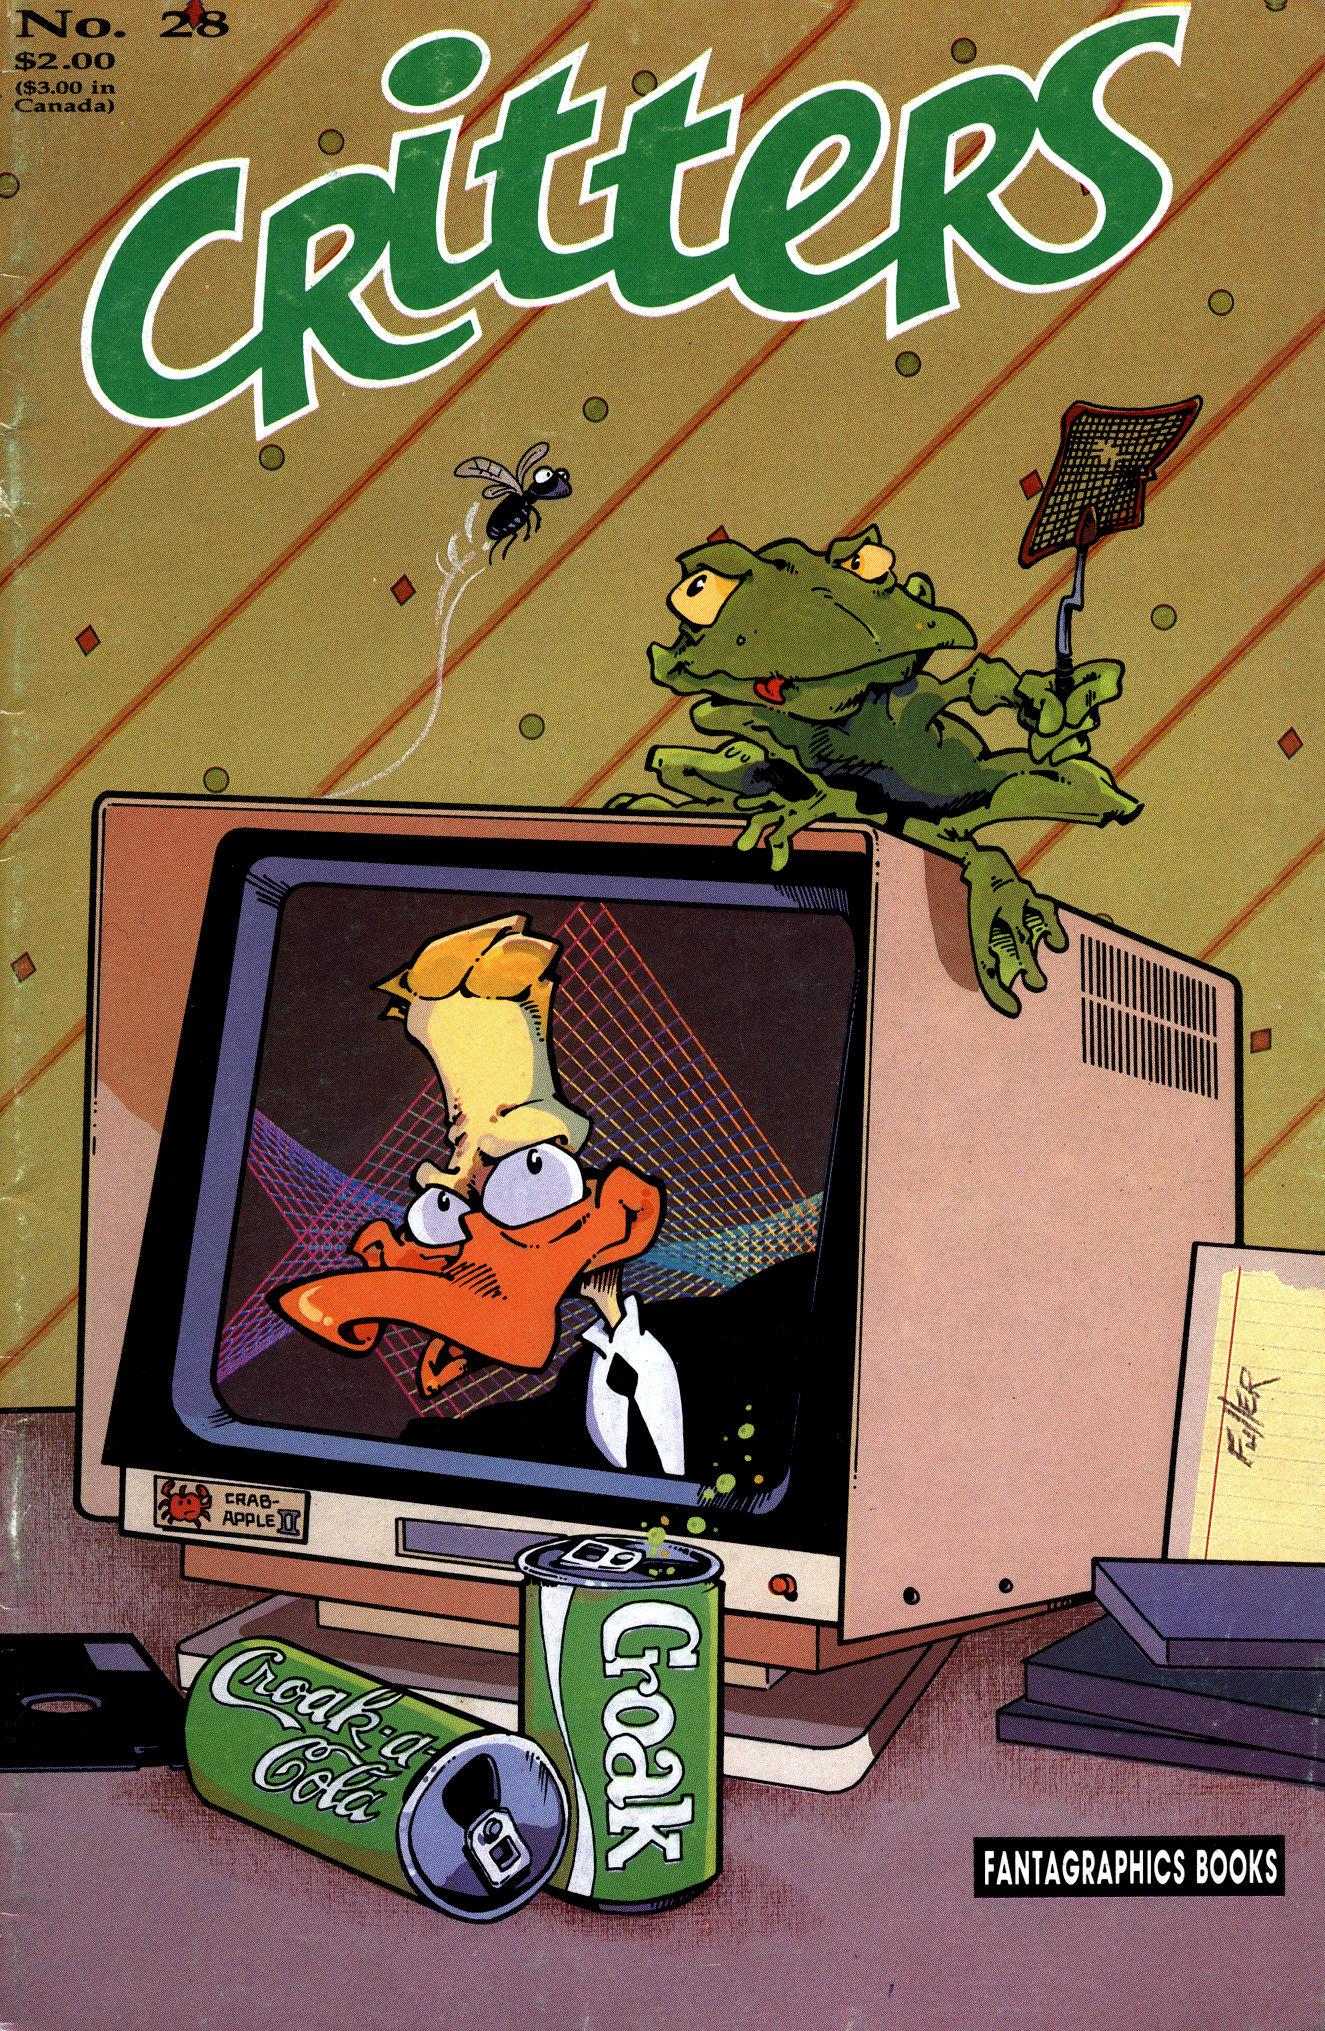 Read online Critters comic -  Issue #28 - 1